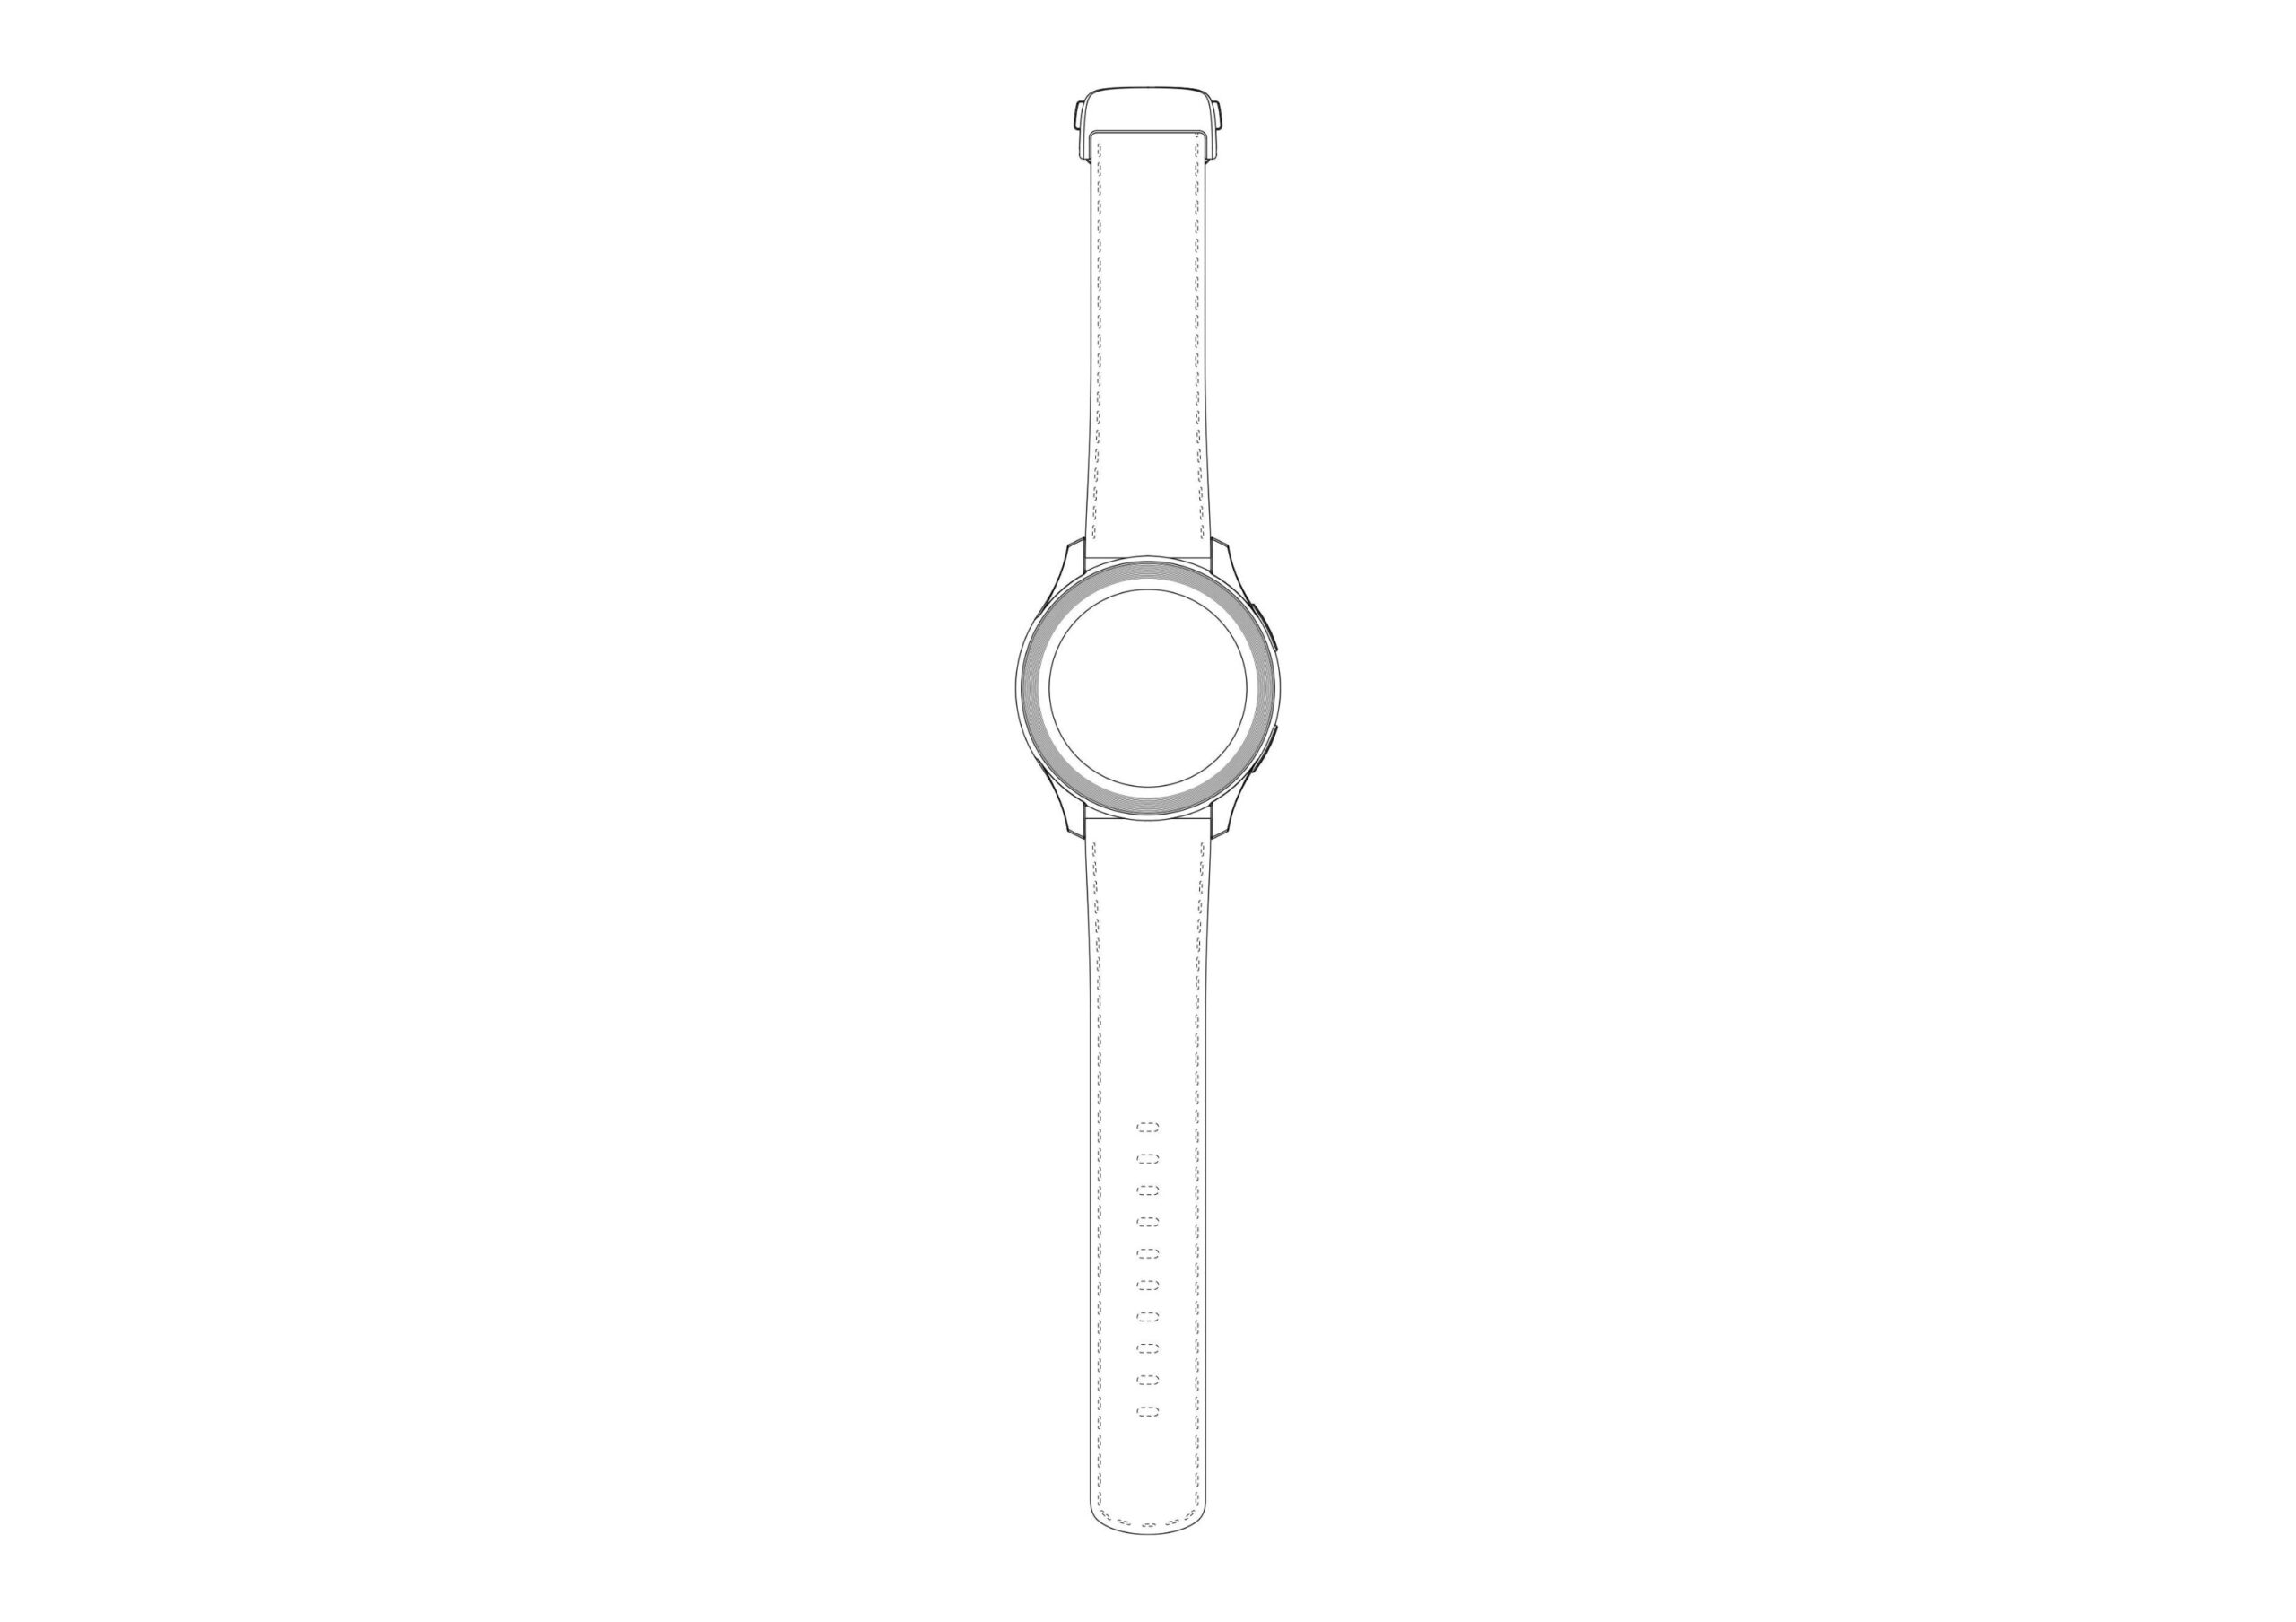 OnePlus Watch Design spotted on German Patent and Trademark Office